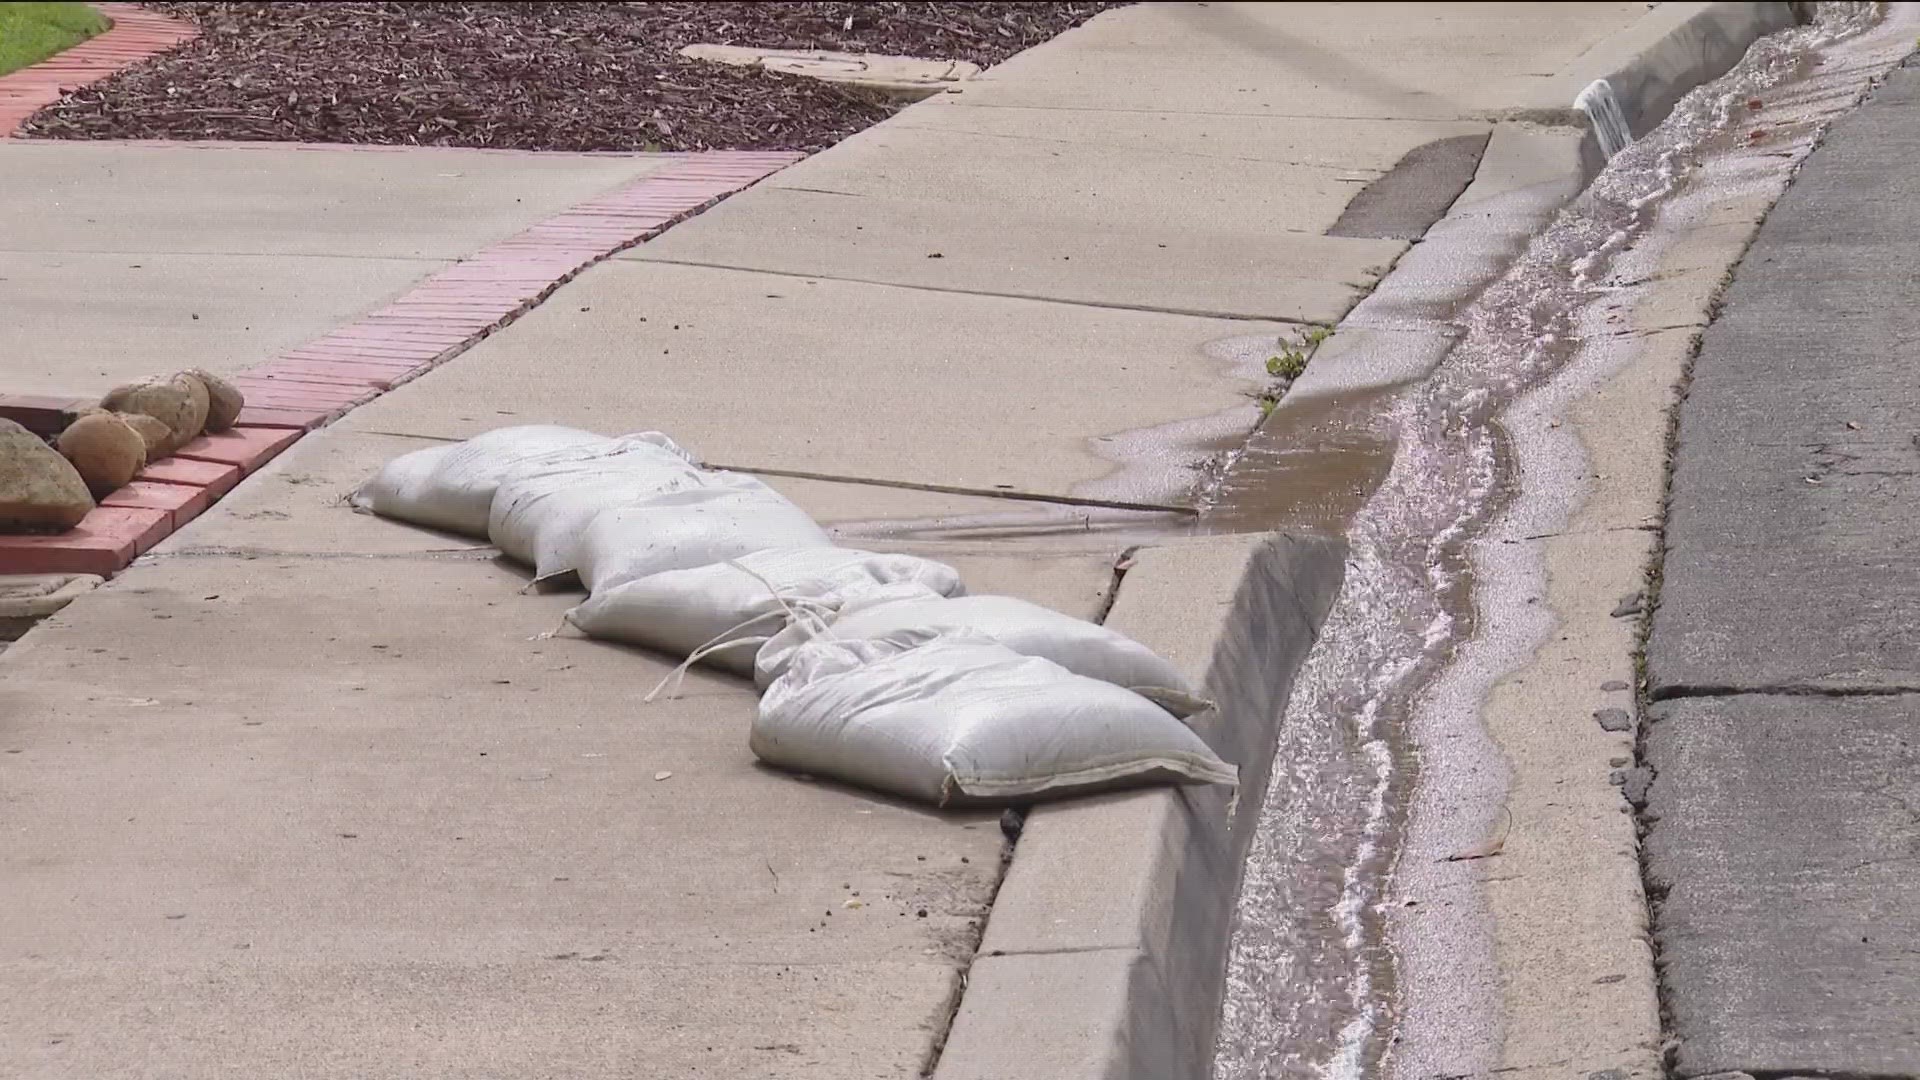 Homeowner has spent thousands trying to fix the problem on her own. She installed a drain in her driveway, bought a pump, and even lined her home with sandbags.